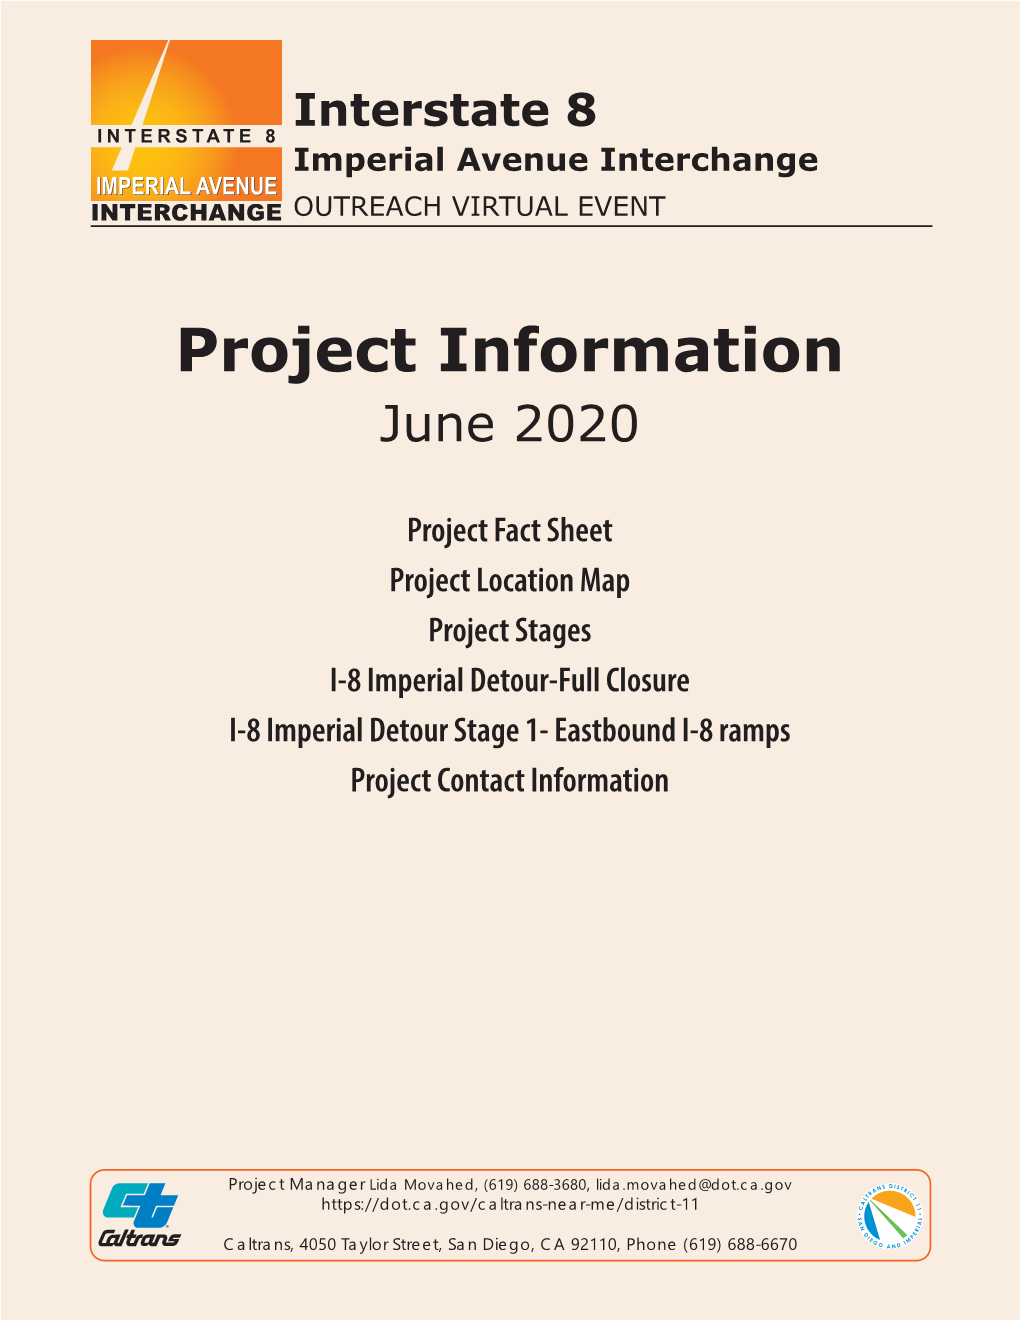 Interstate 8 Imperial Avenue Interchange OUTREACH VIRTUAL EVENT